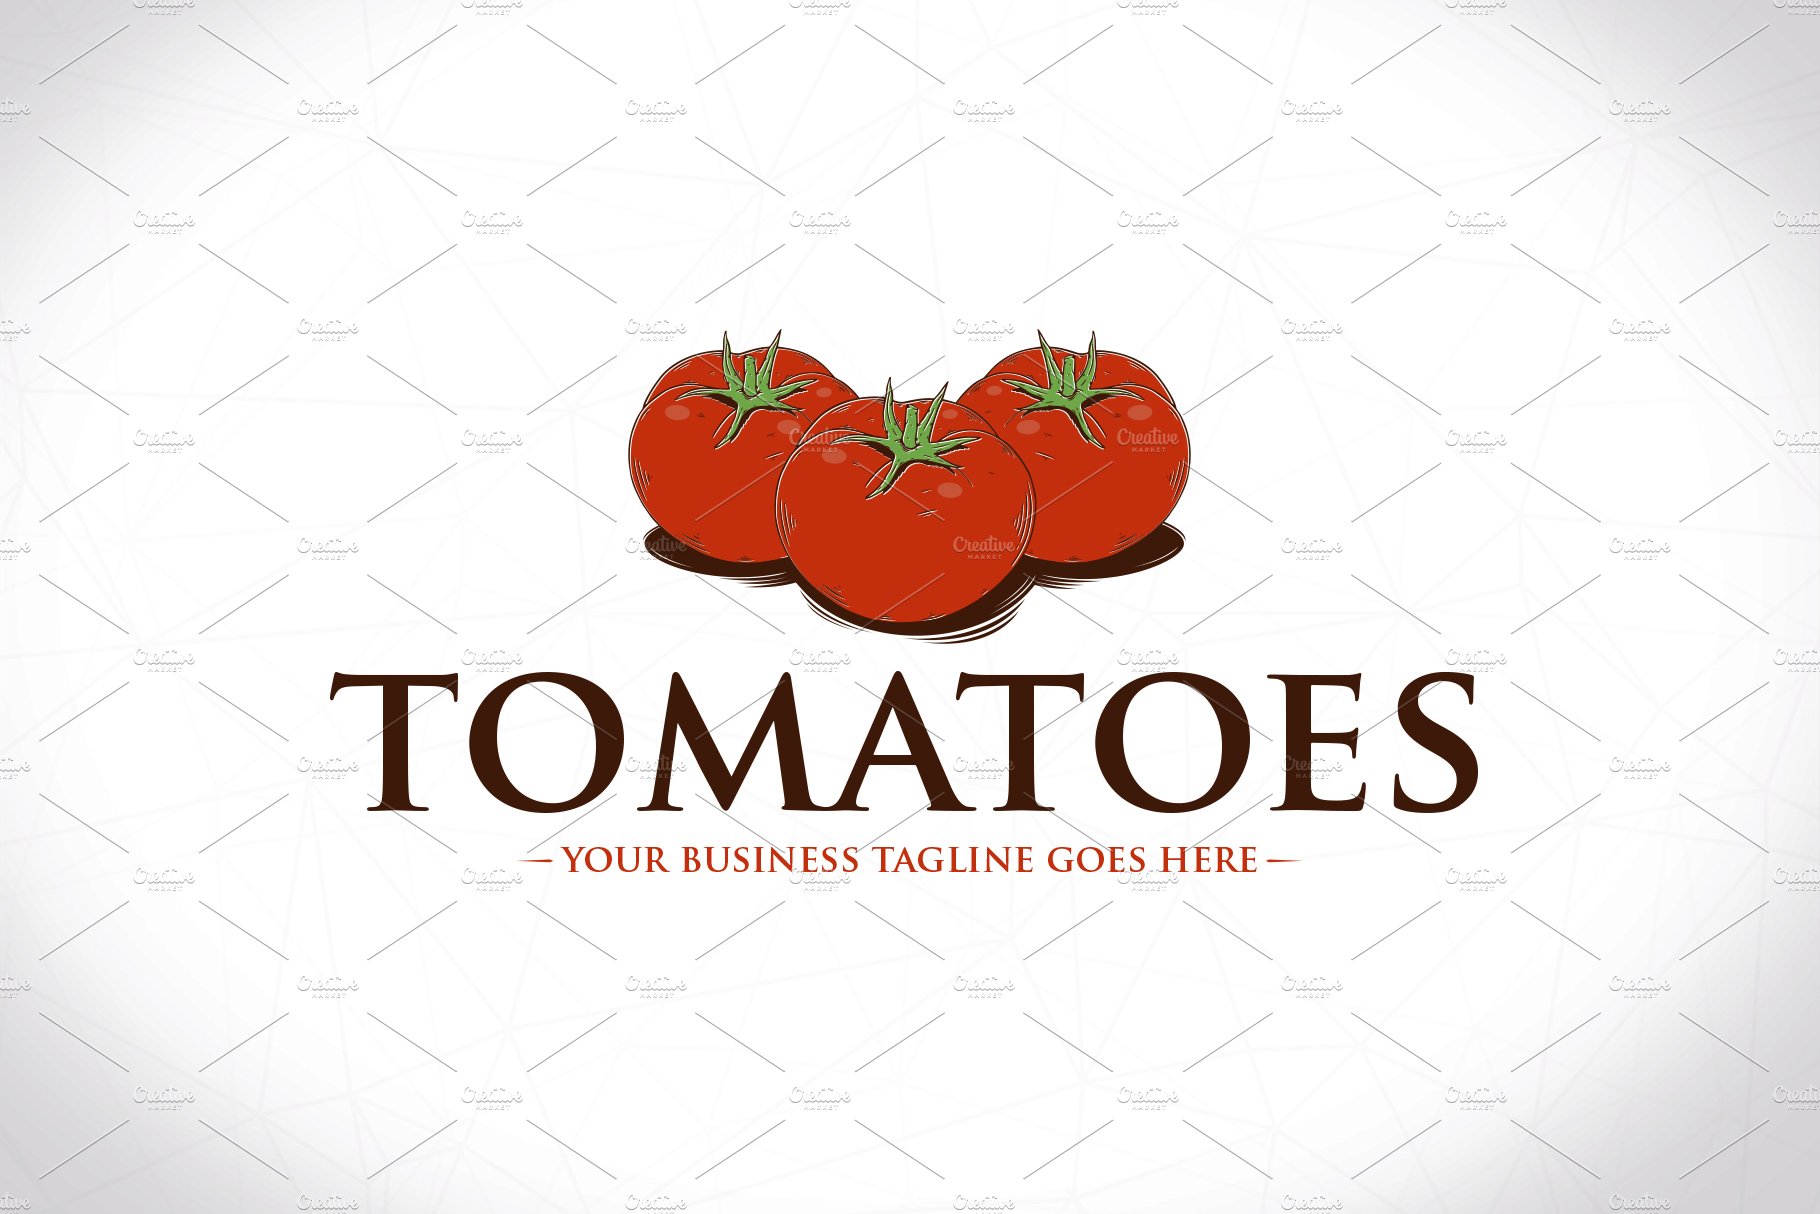 Tomatoes Logo Template cover image.